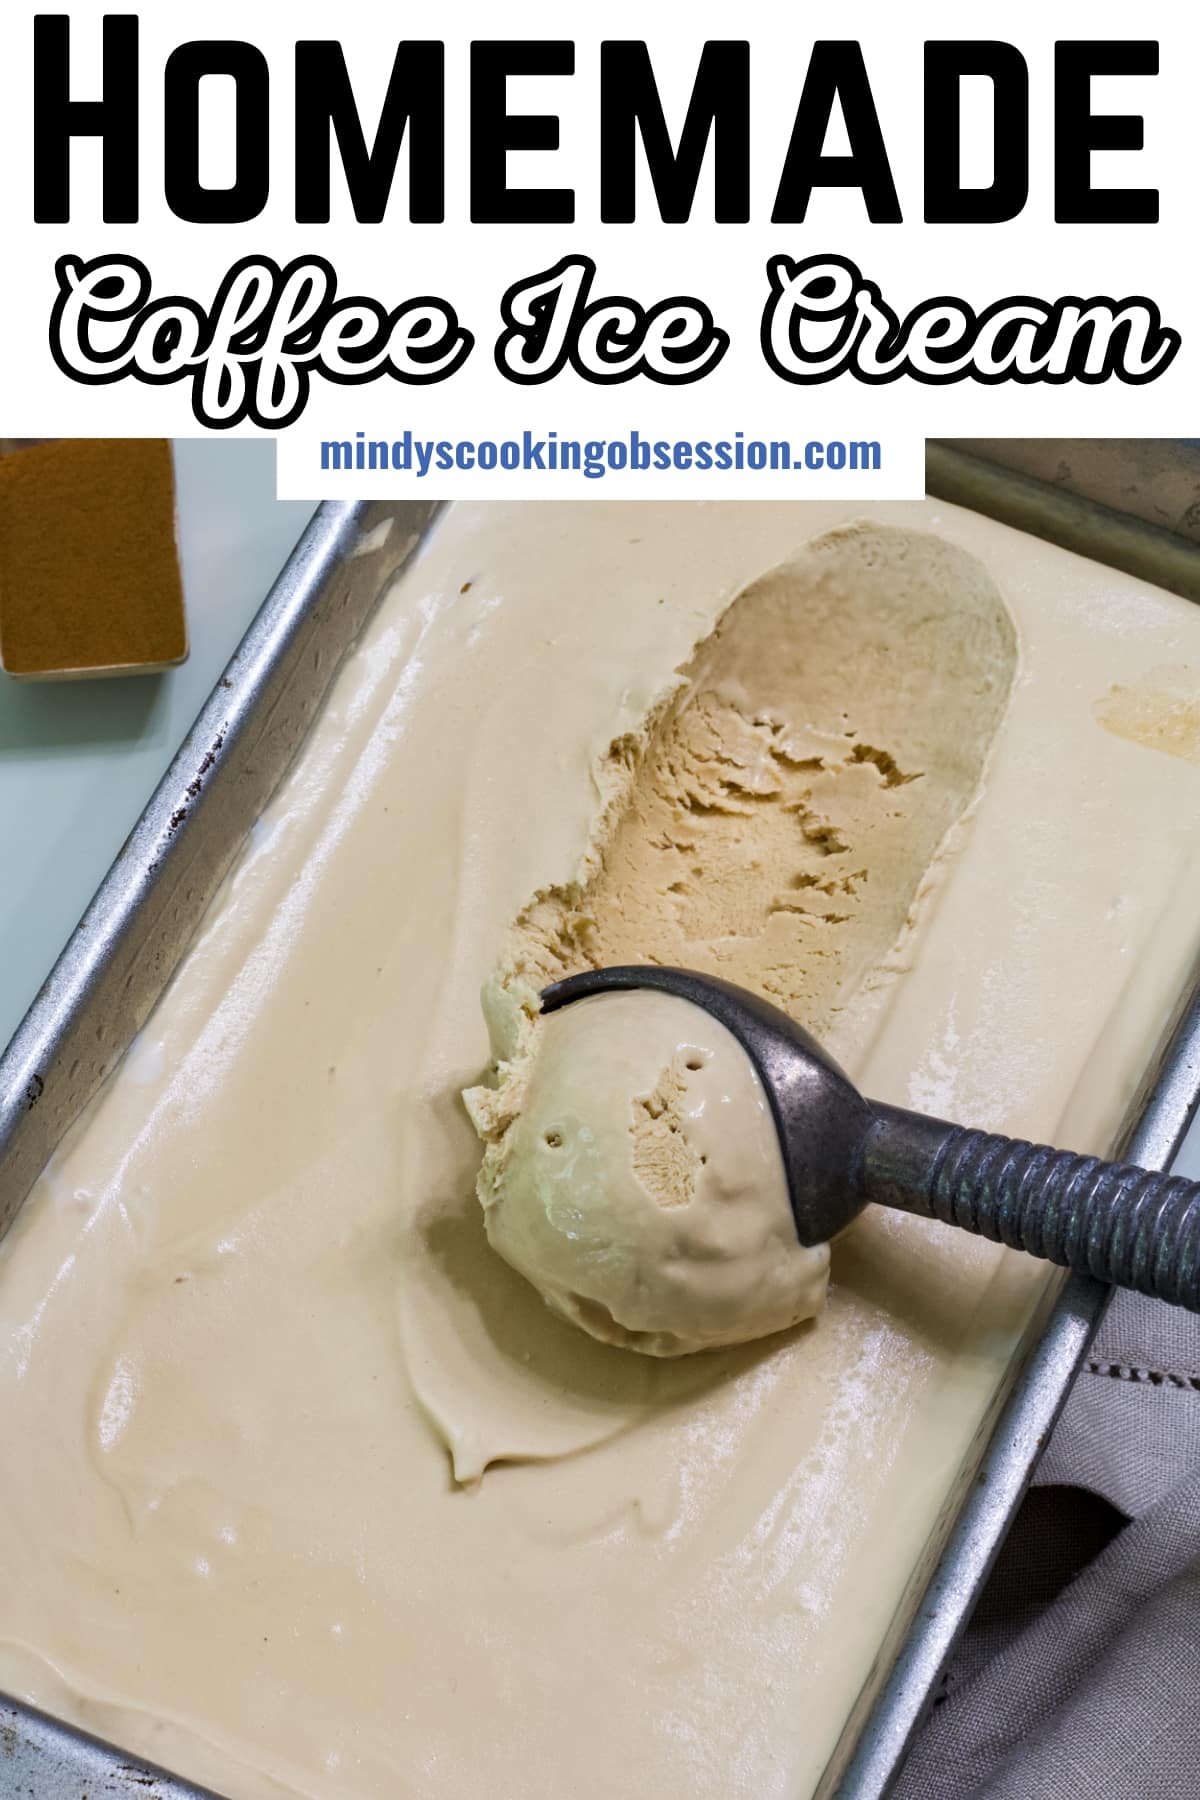 Making delicious coffee ice cream is so easy. You only need 4 simple ingredients! Just heavy cream, sweetened condensed milk, instant espresso, and vanilla. The best part? No ice cream machine needed. What I love most about this recipe is how simple it is. No separating eggs, no cooking, no straining—it's easy peasy! Just whip the cream, fold in the sweetened condensed milk, instant coffee, and vanilla, then pop it in the freezer. Enjoy homemade coffee ice cream with minimal effort! via @mindyscookingobsession